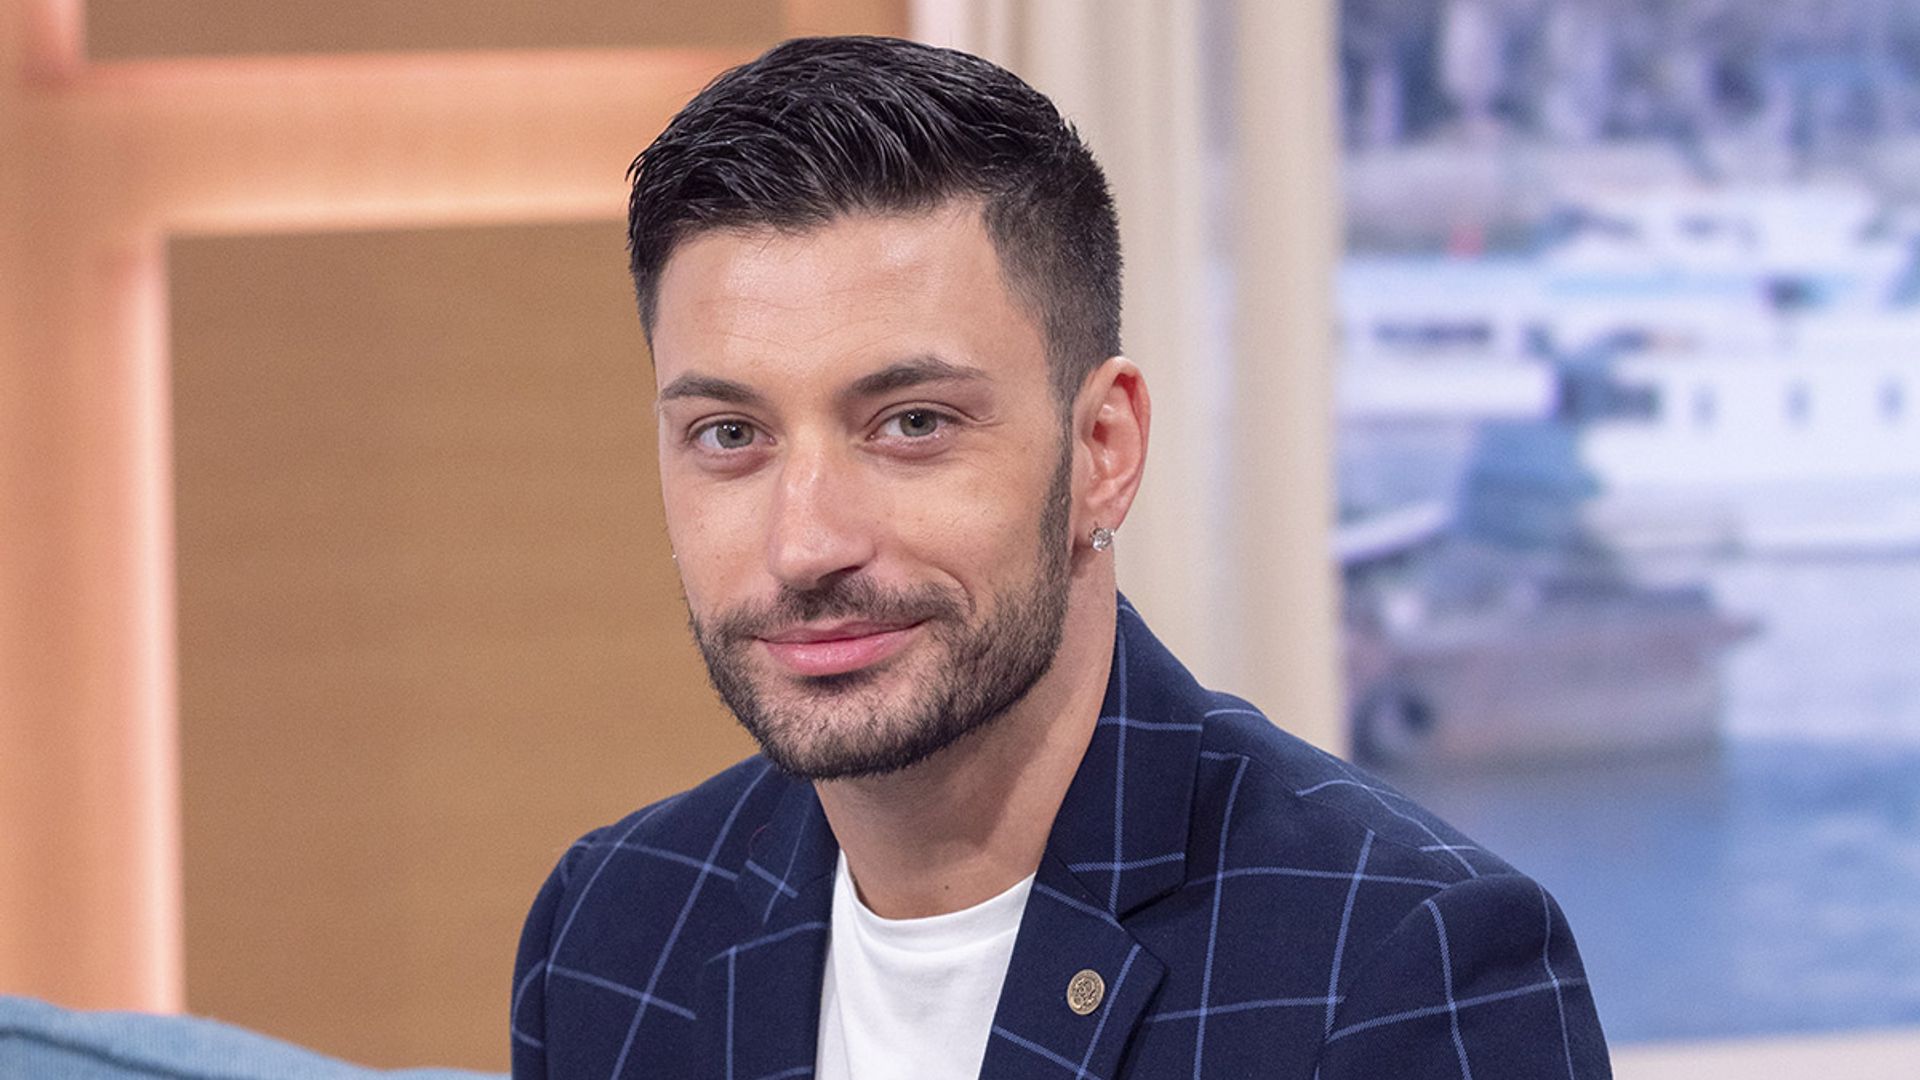 Strictly's Giovanni Pernice drives fans wild with adorable baby photo